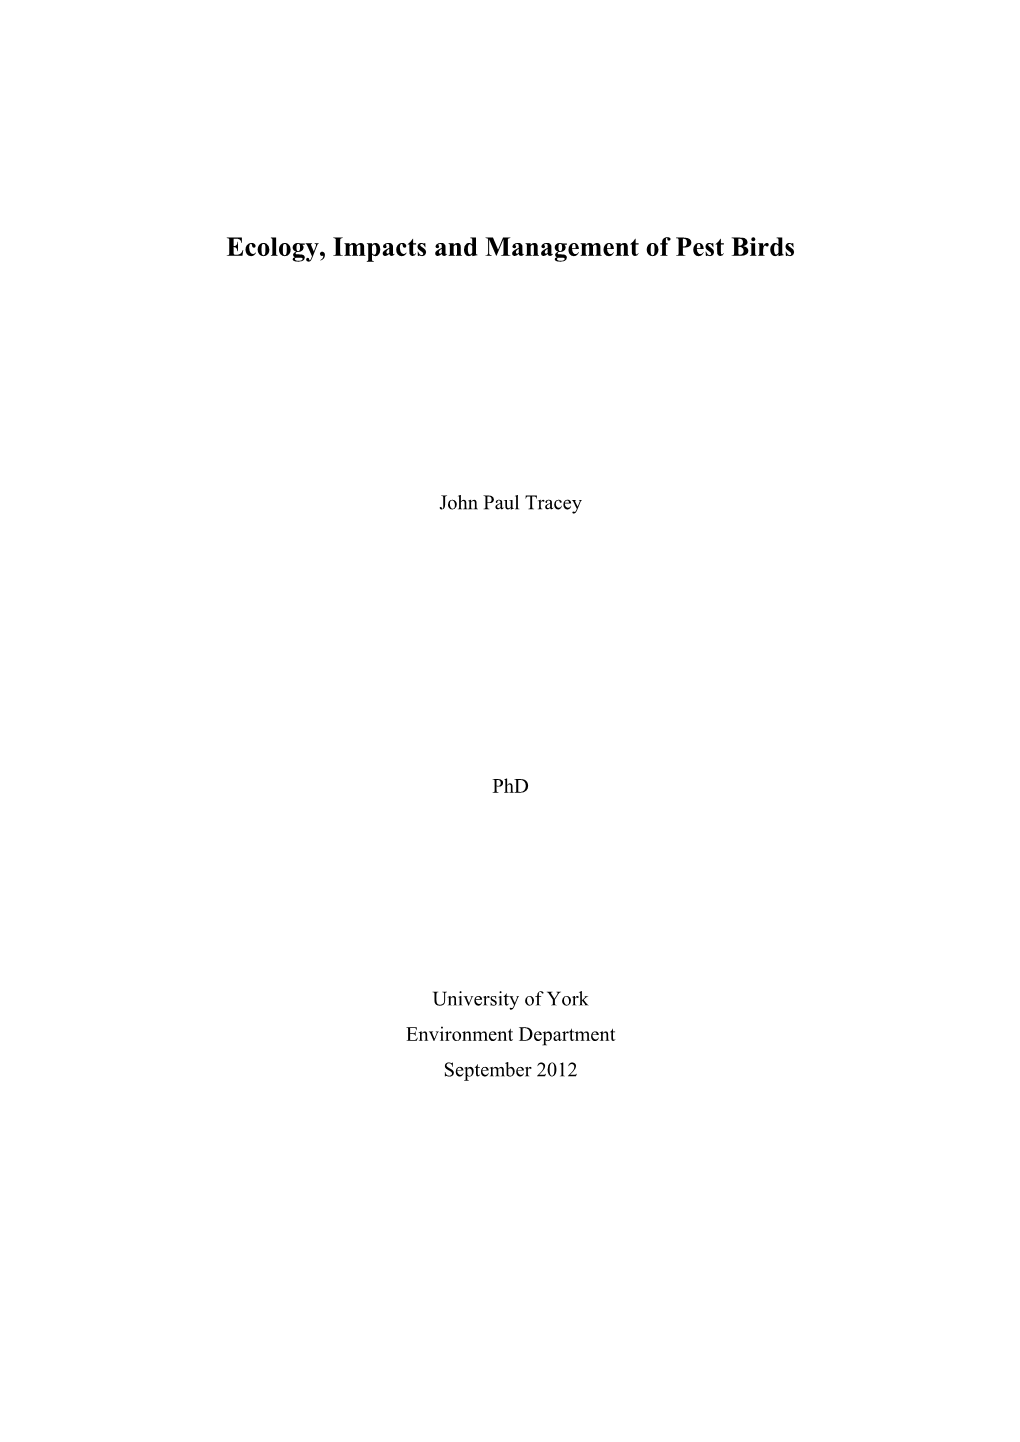 Ecology, Impacts and Management of Pest Birds